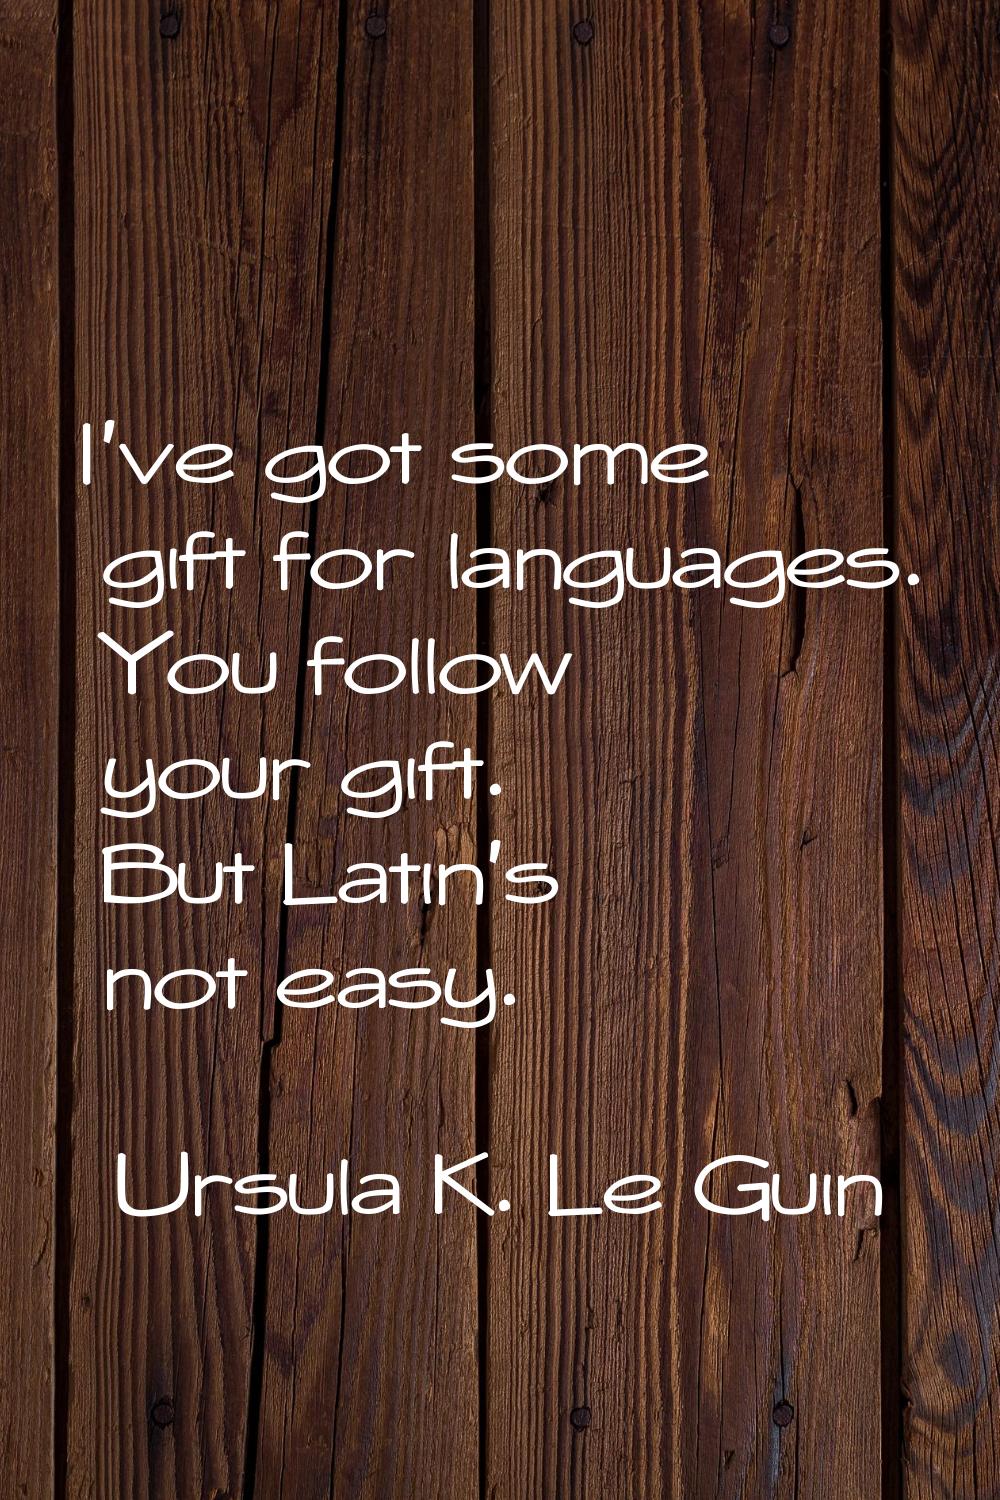 I've got some gift for languages. You follow your gift. But Latin's not easy.